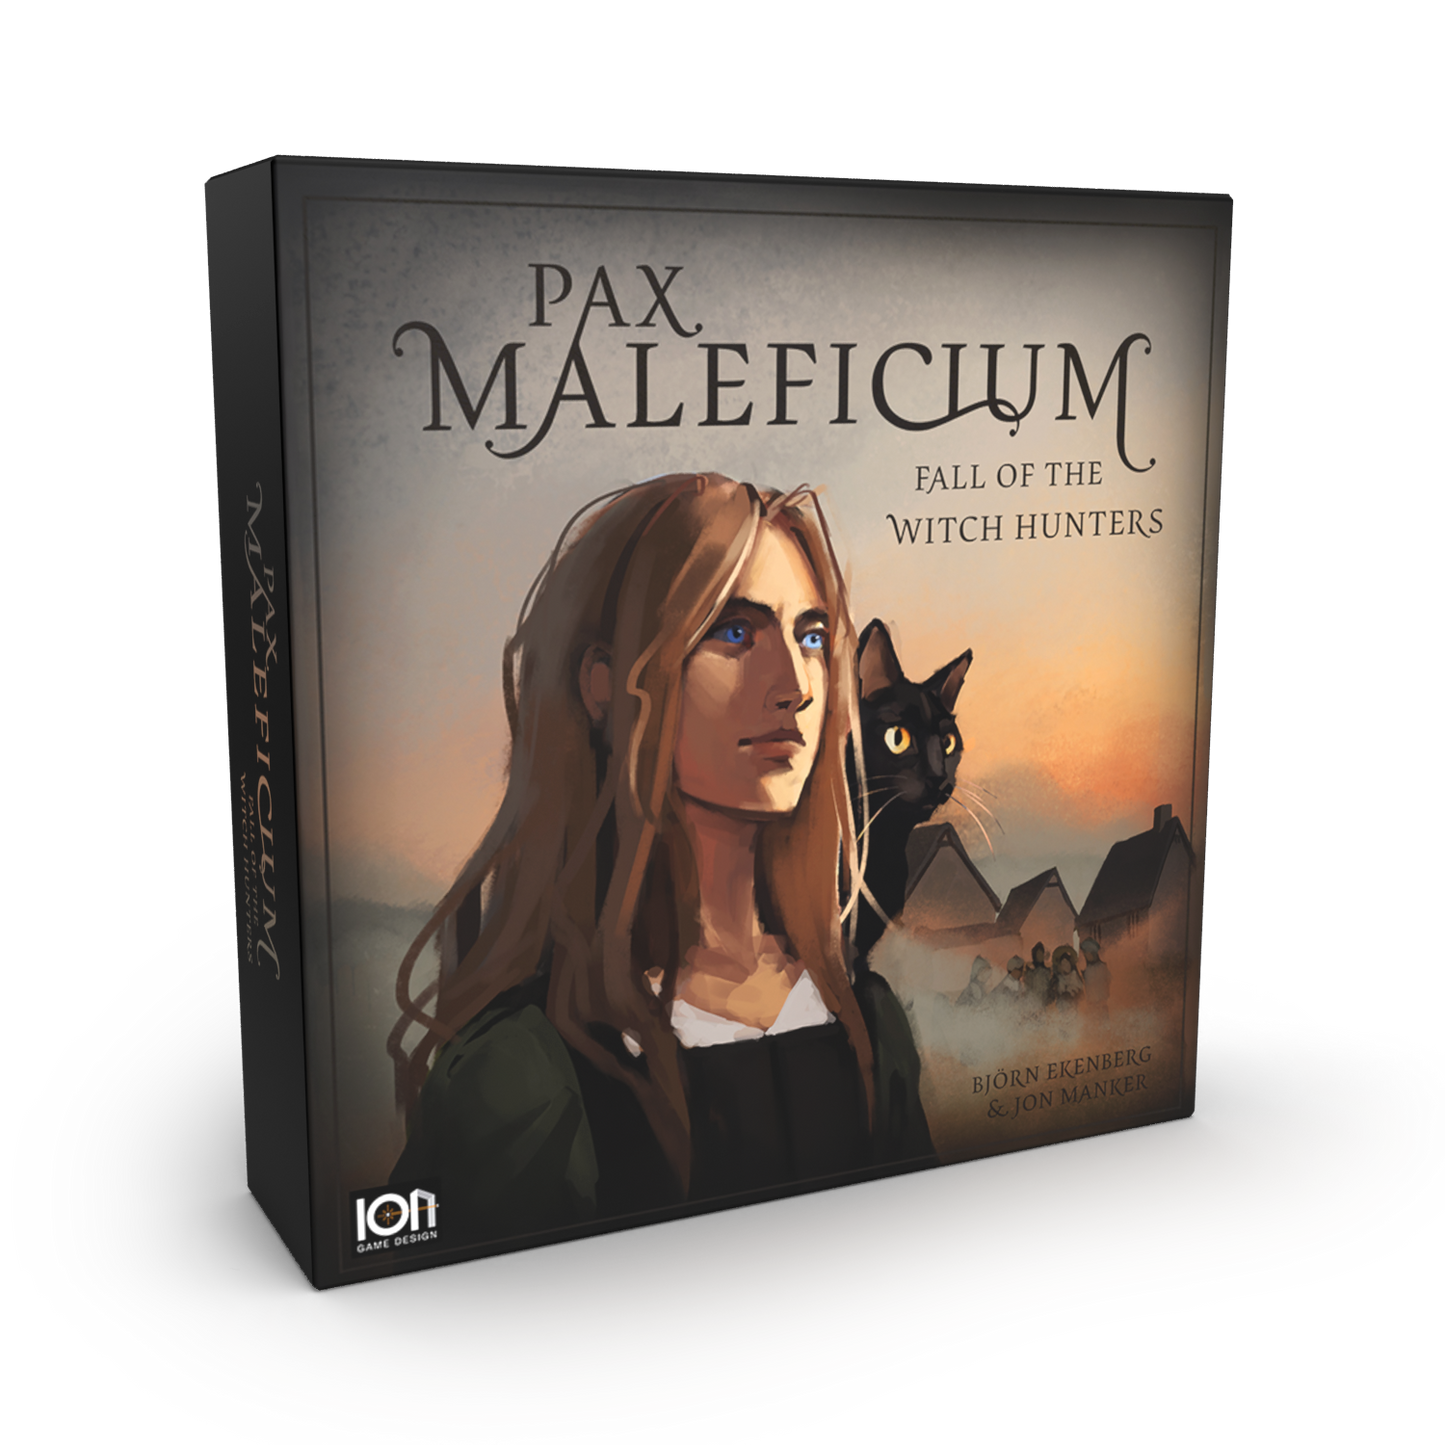 Pax Maleficium Fall of the Witch Hunters Retail